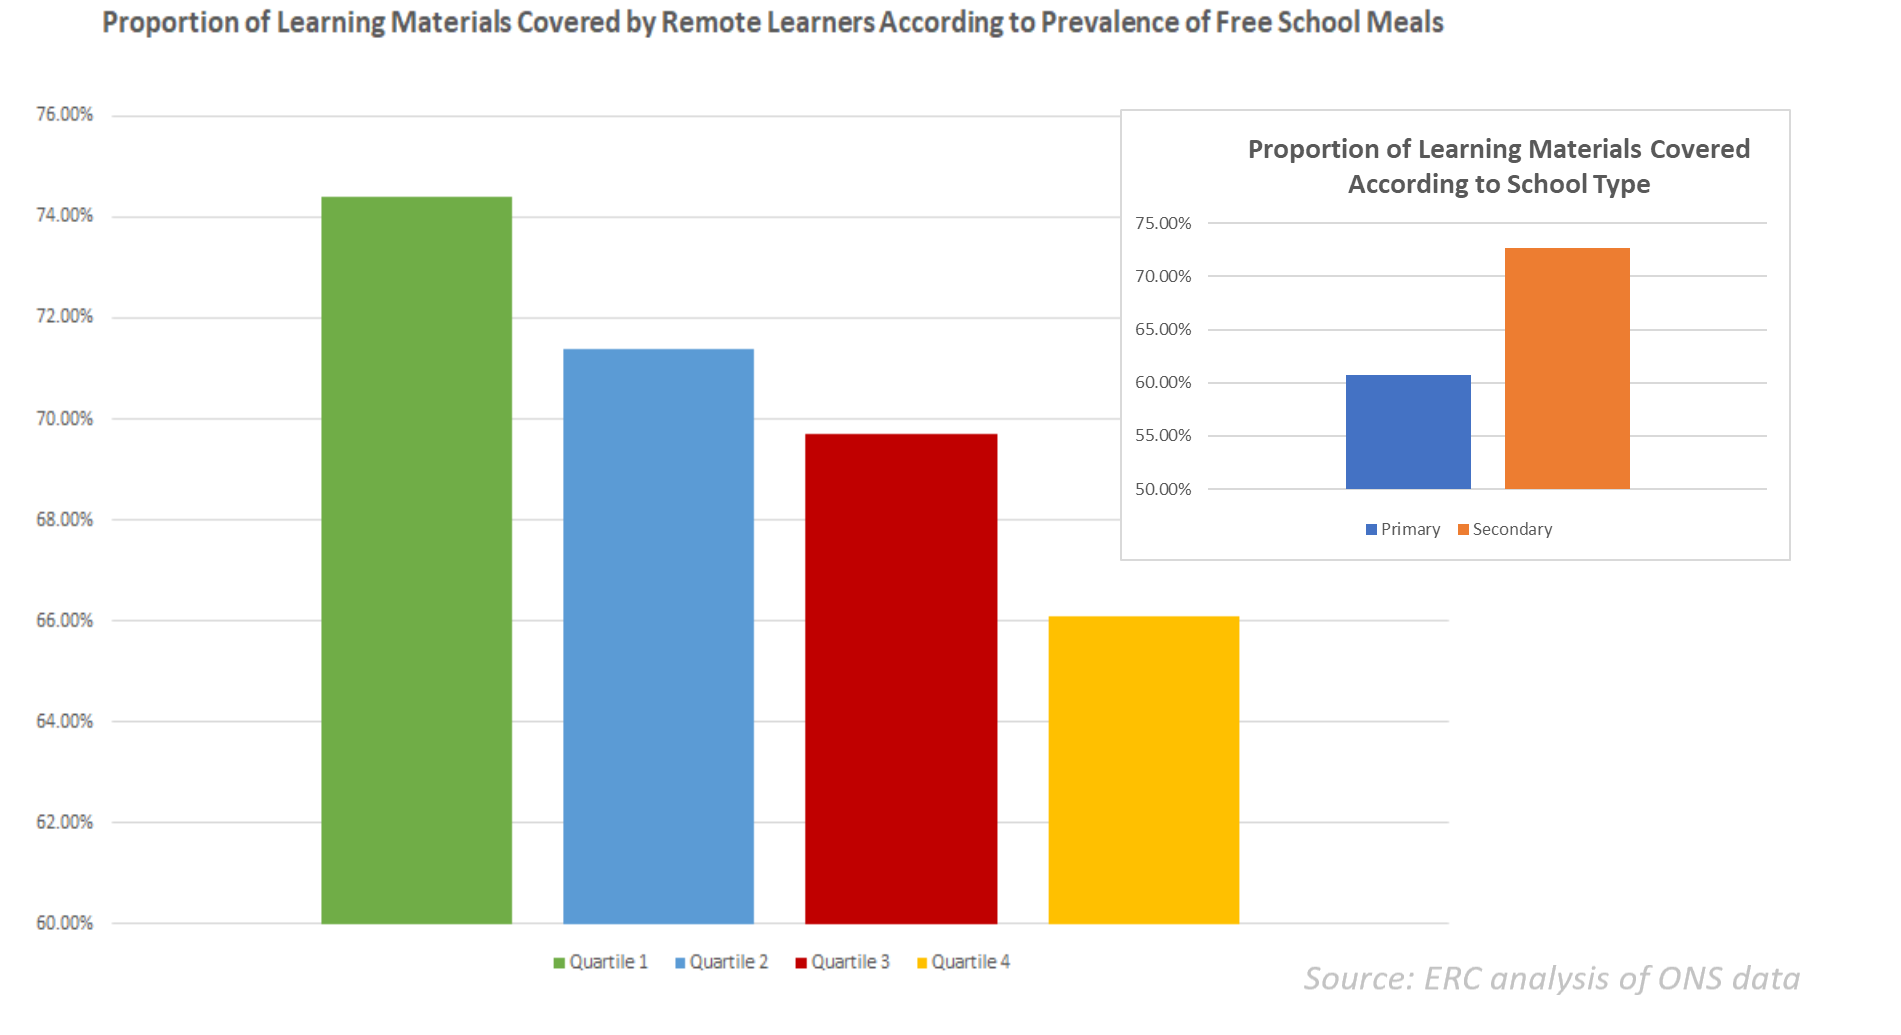 Free school meals and remote learning